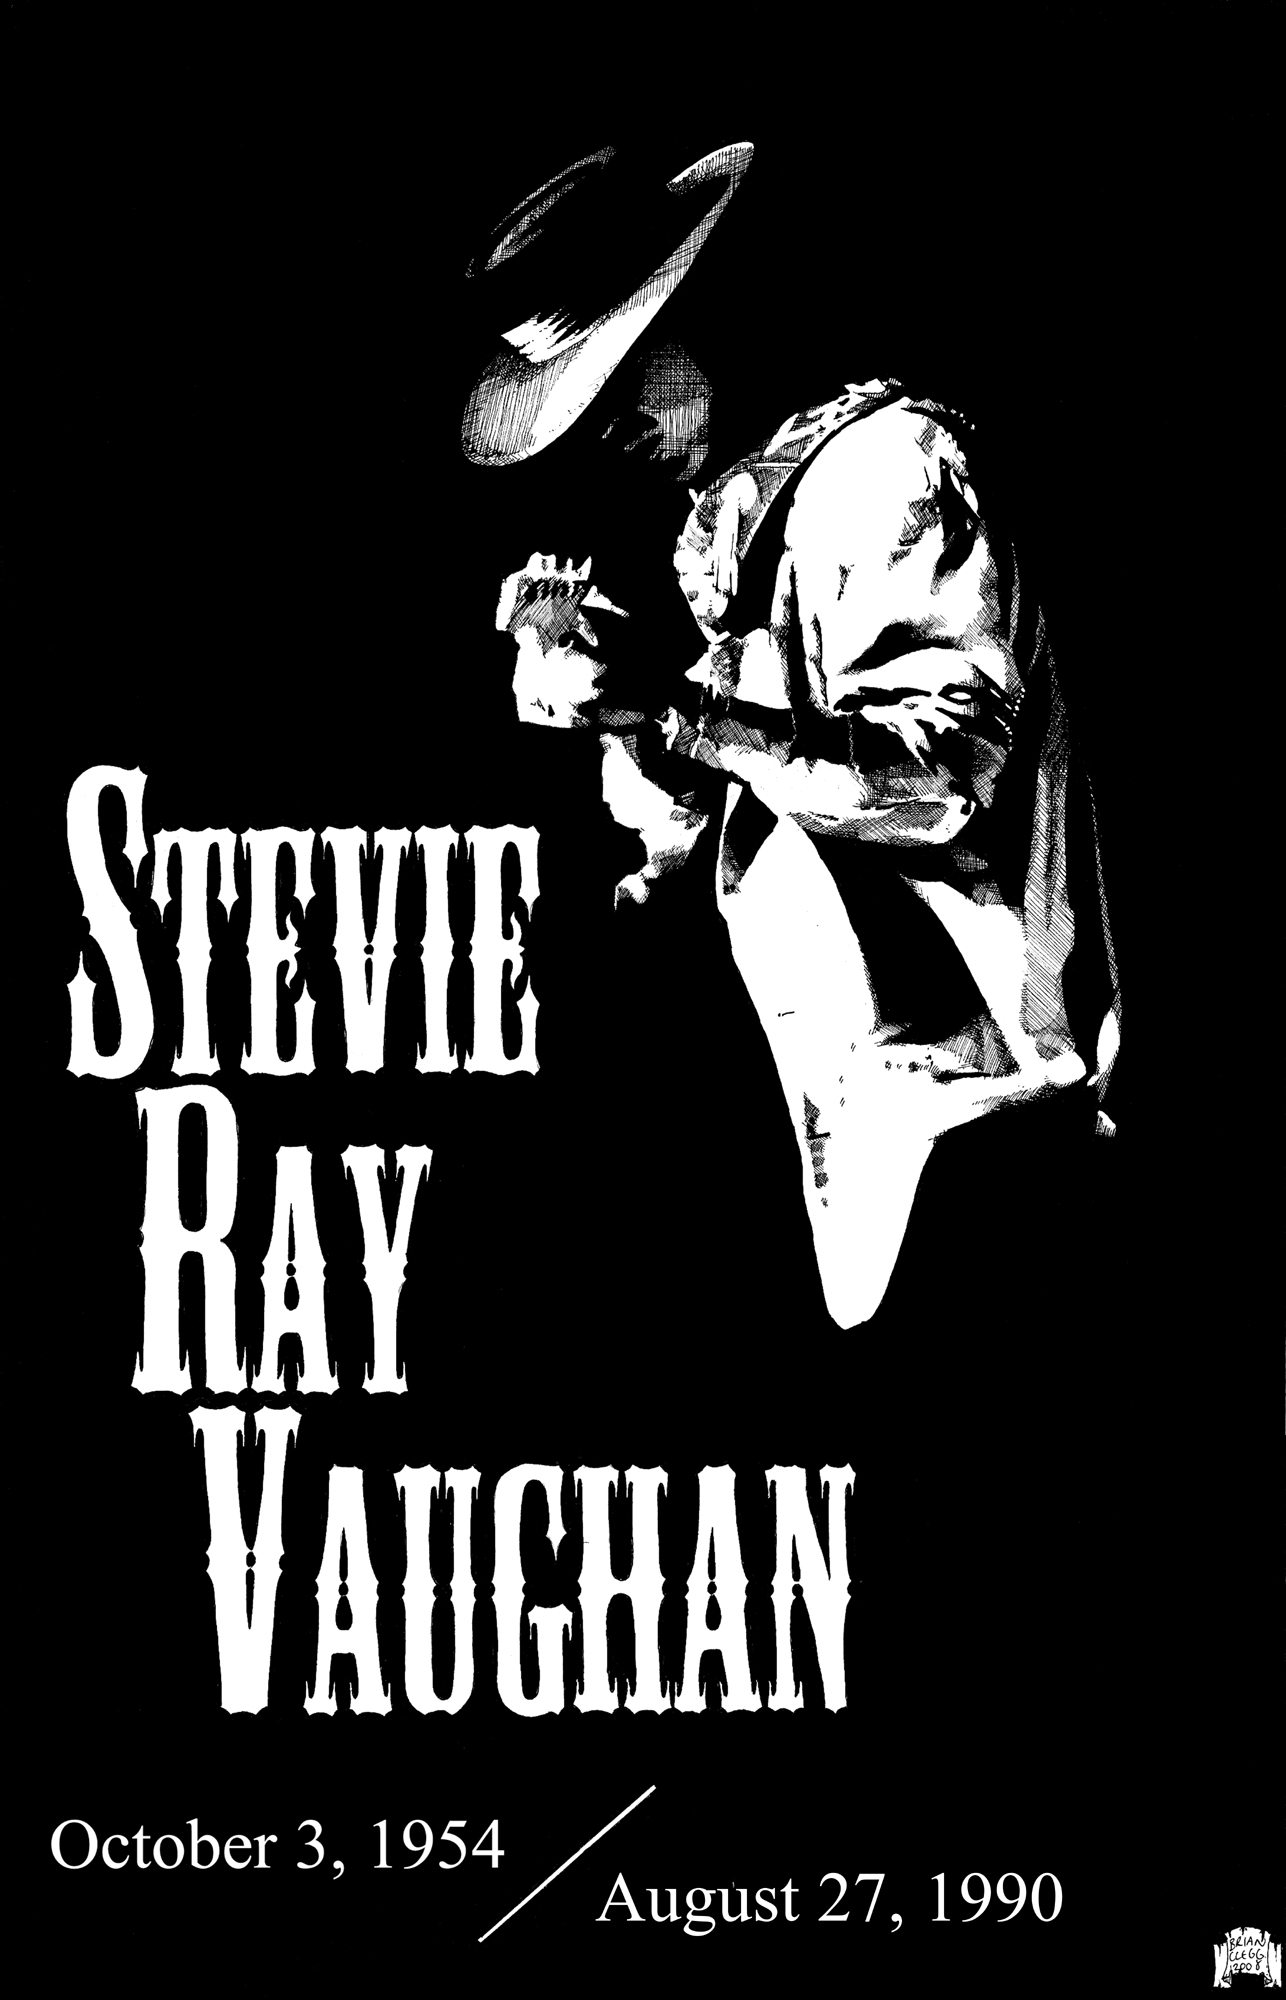 Stevie Ray Vaughan by DarkZoneGraphics on